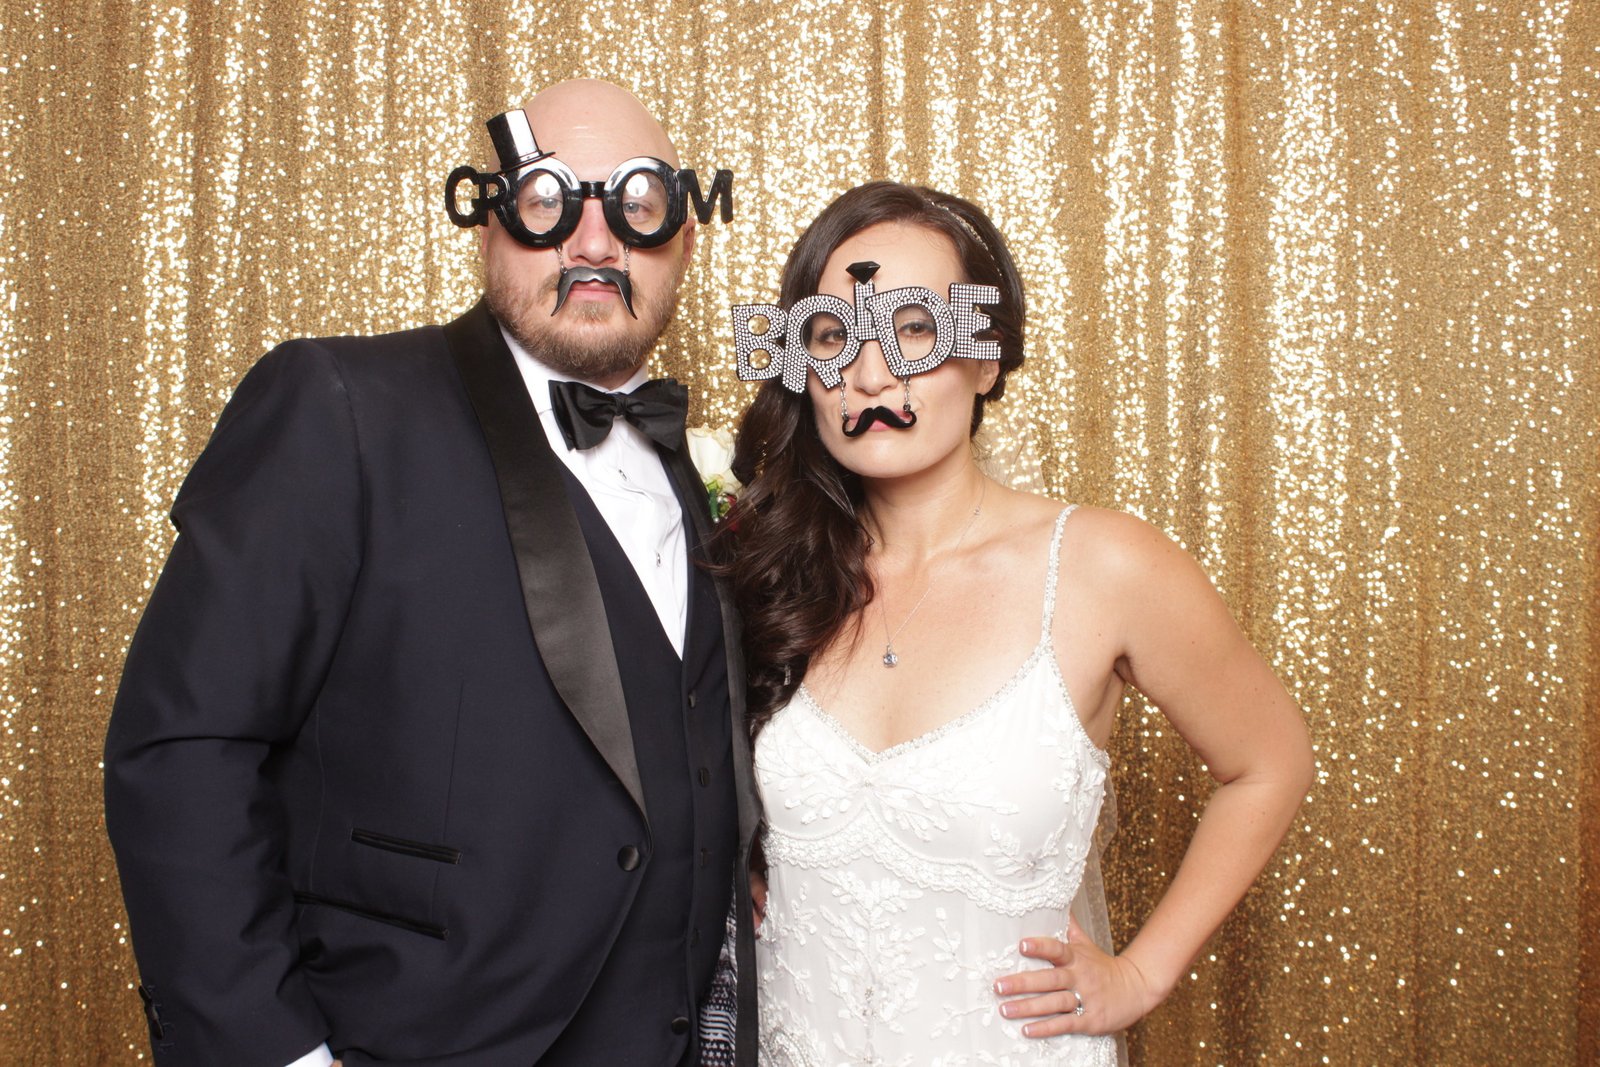 photobooth, prints, props, couple